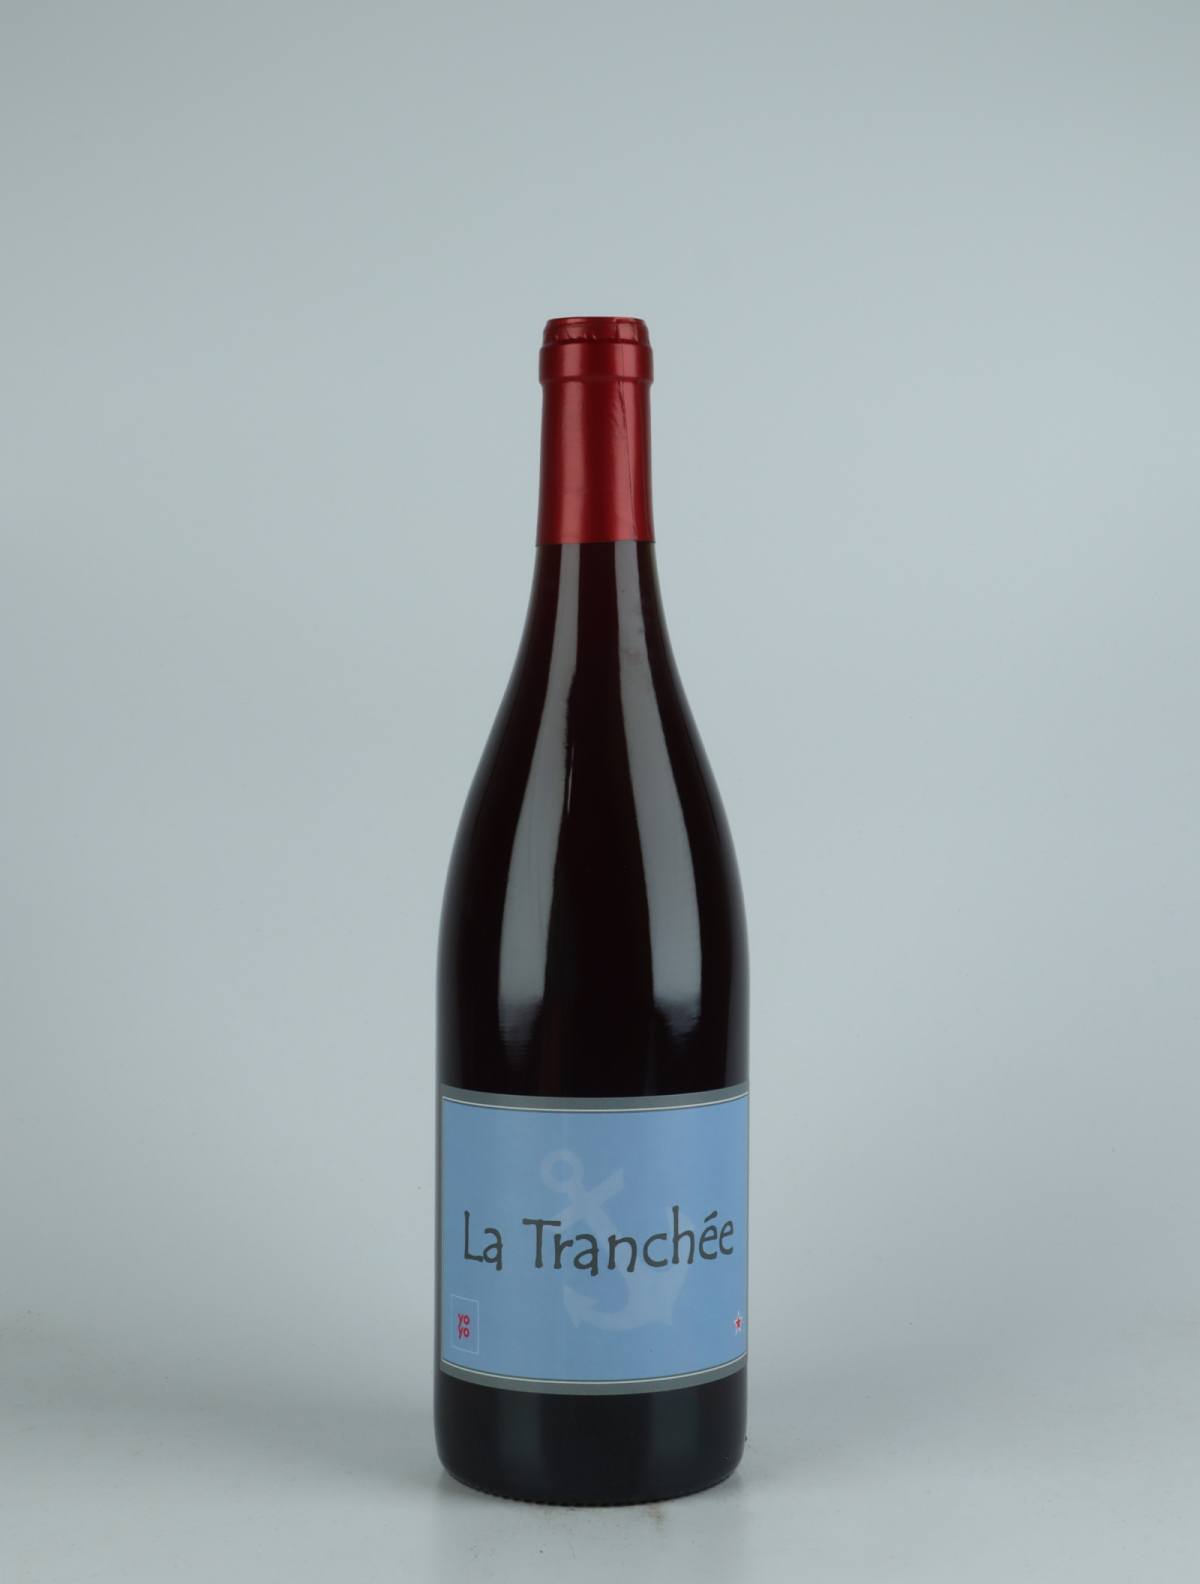 A bottle 2021 La Tranchée Red wine from Domaine Yoyo, Rousillon in France